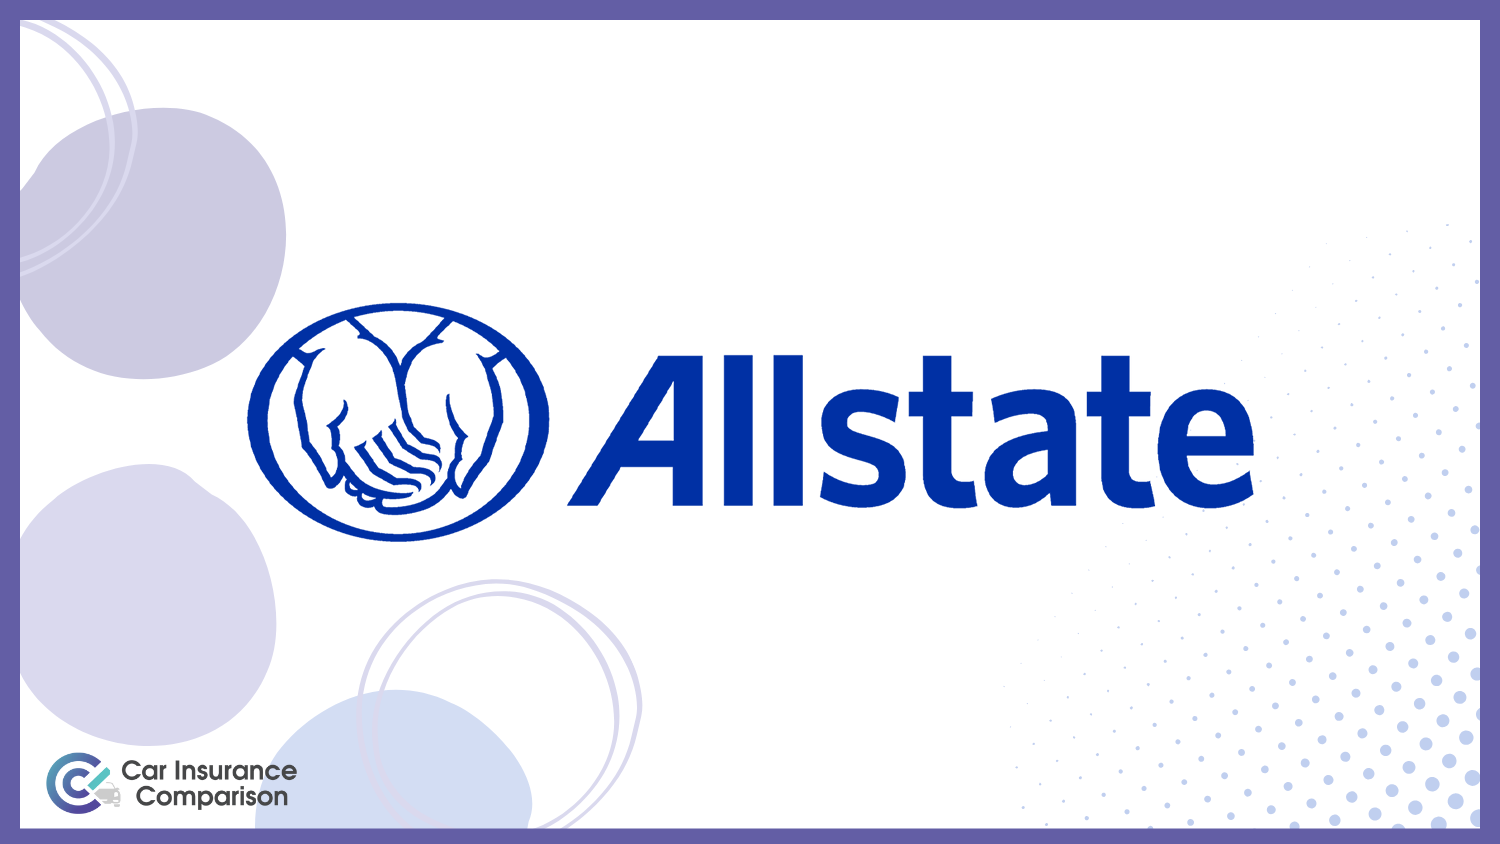 Allstate: Compare Home-Care Worker Car Insurance Rates